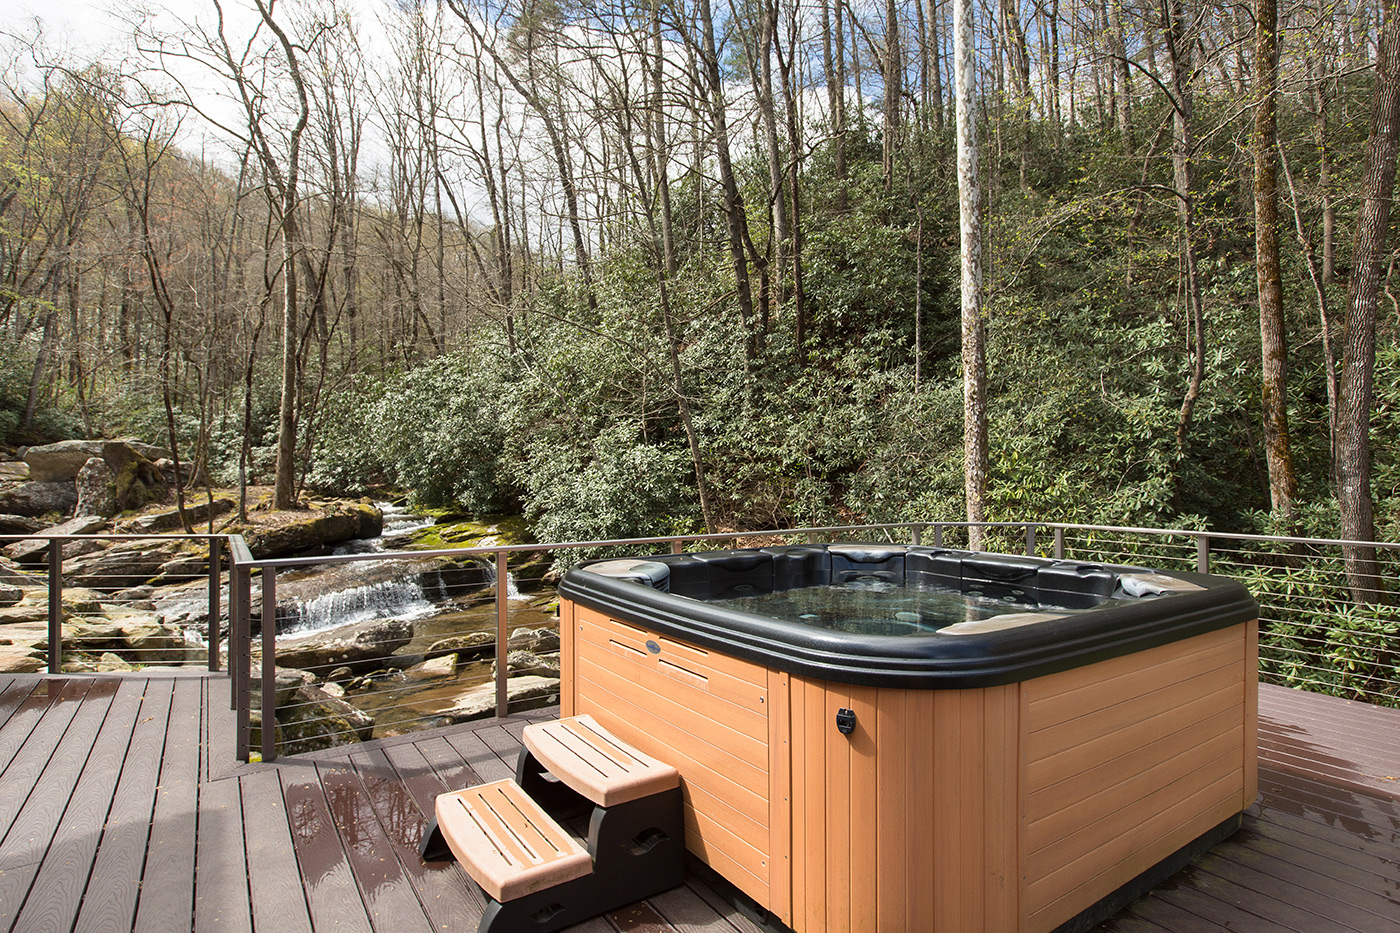 Luxury Cabin with Hot Tub Overlooking Mountain Stream